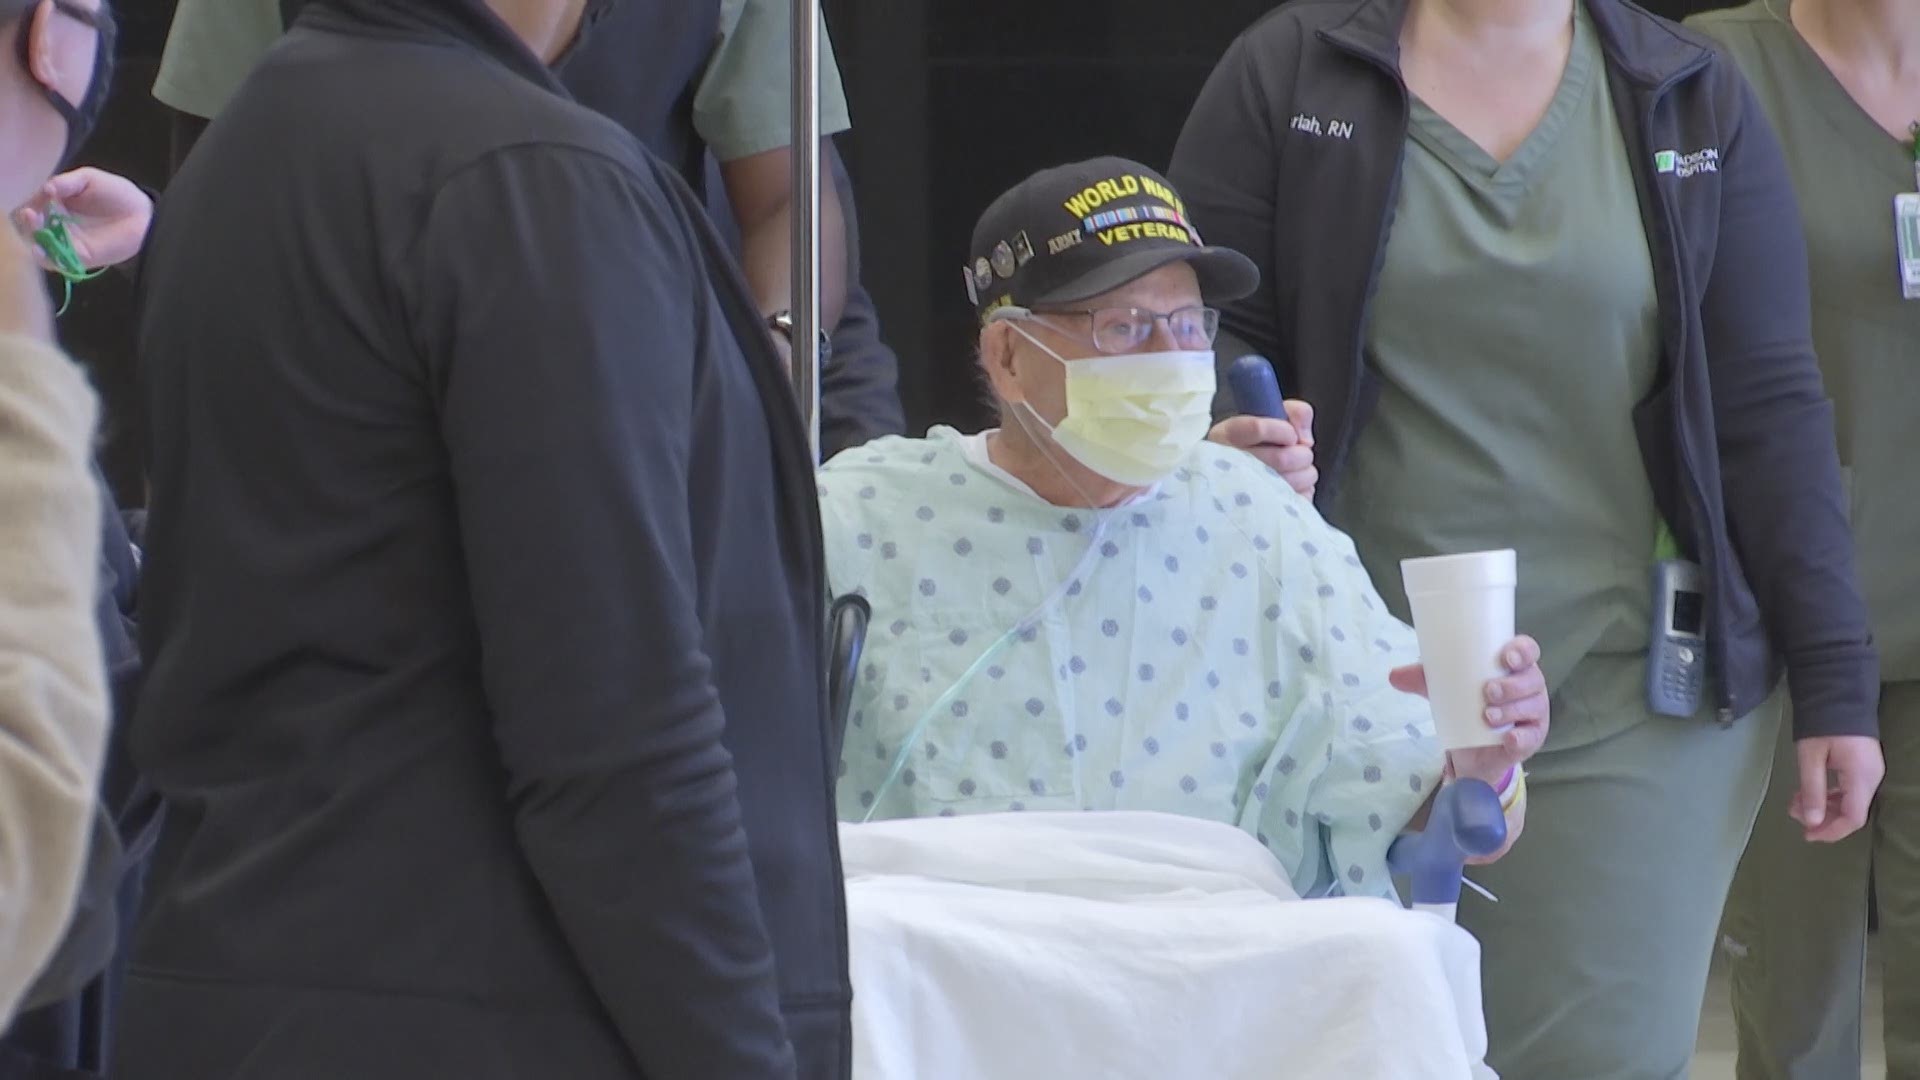 A WWII veteran from Madison, Alabama, was discharged from Madison Hospital on December 1 ahead of his 104th birthday on Thursday.